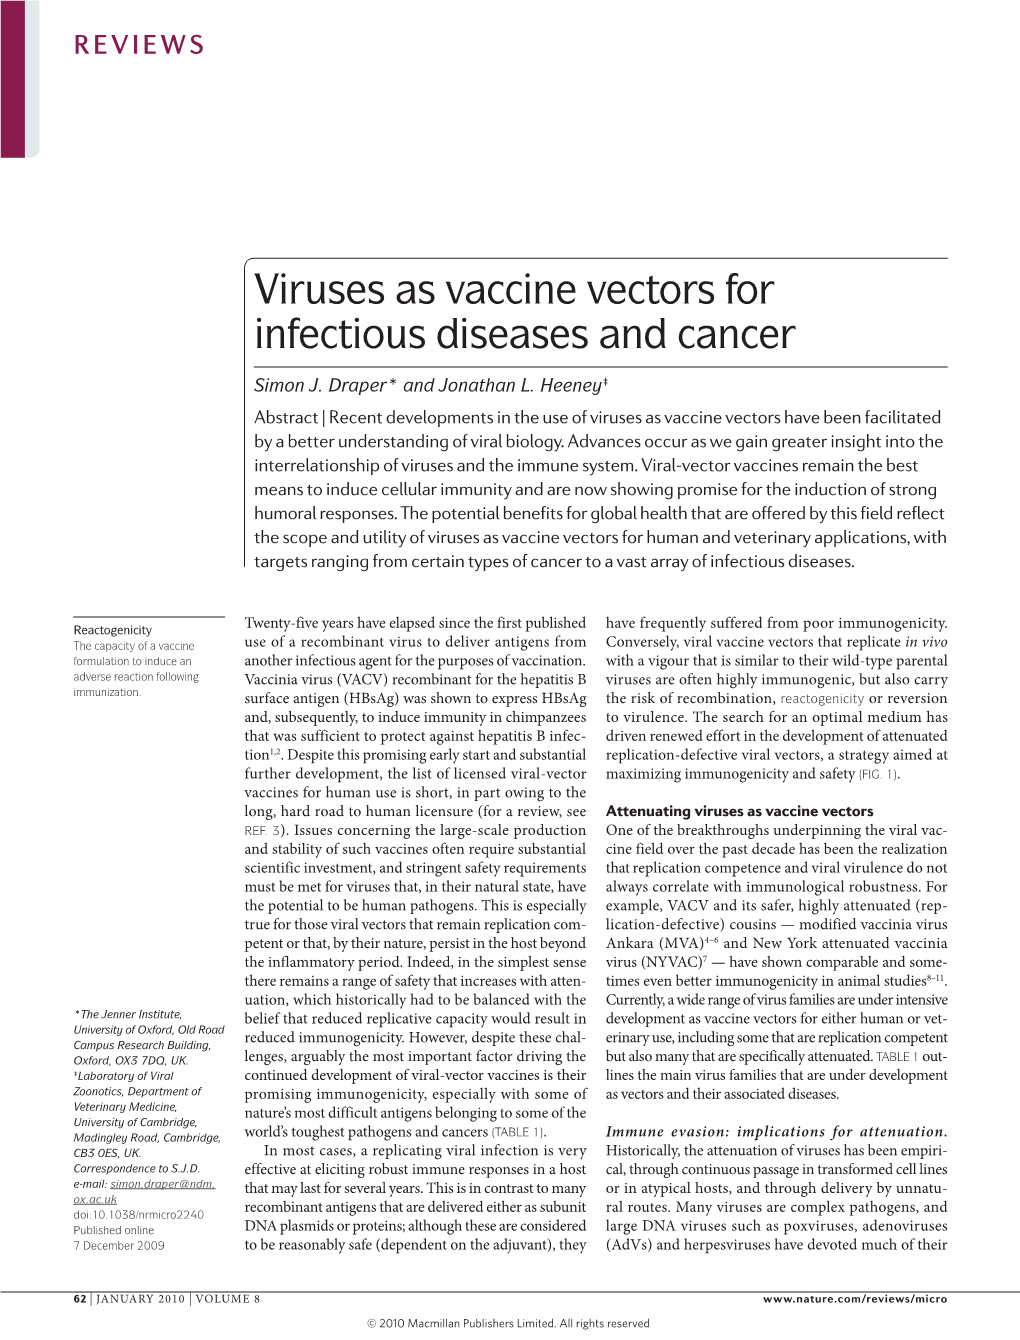 Viruses As Vaccine Vectors for Infectious Diseases and Cancer